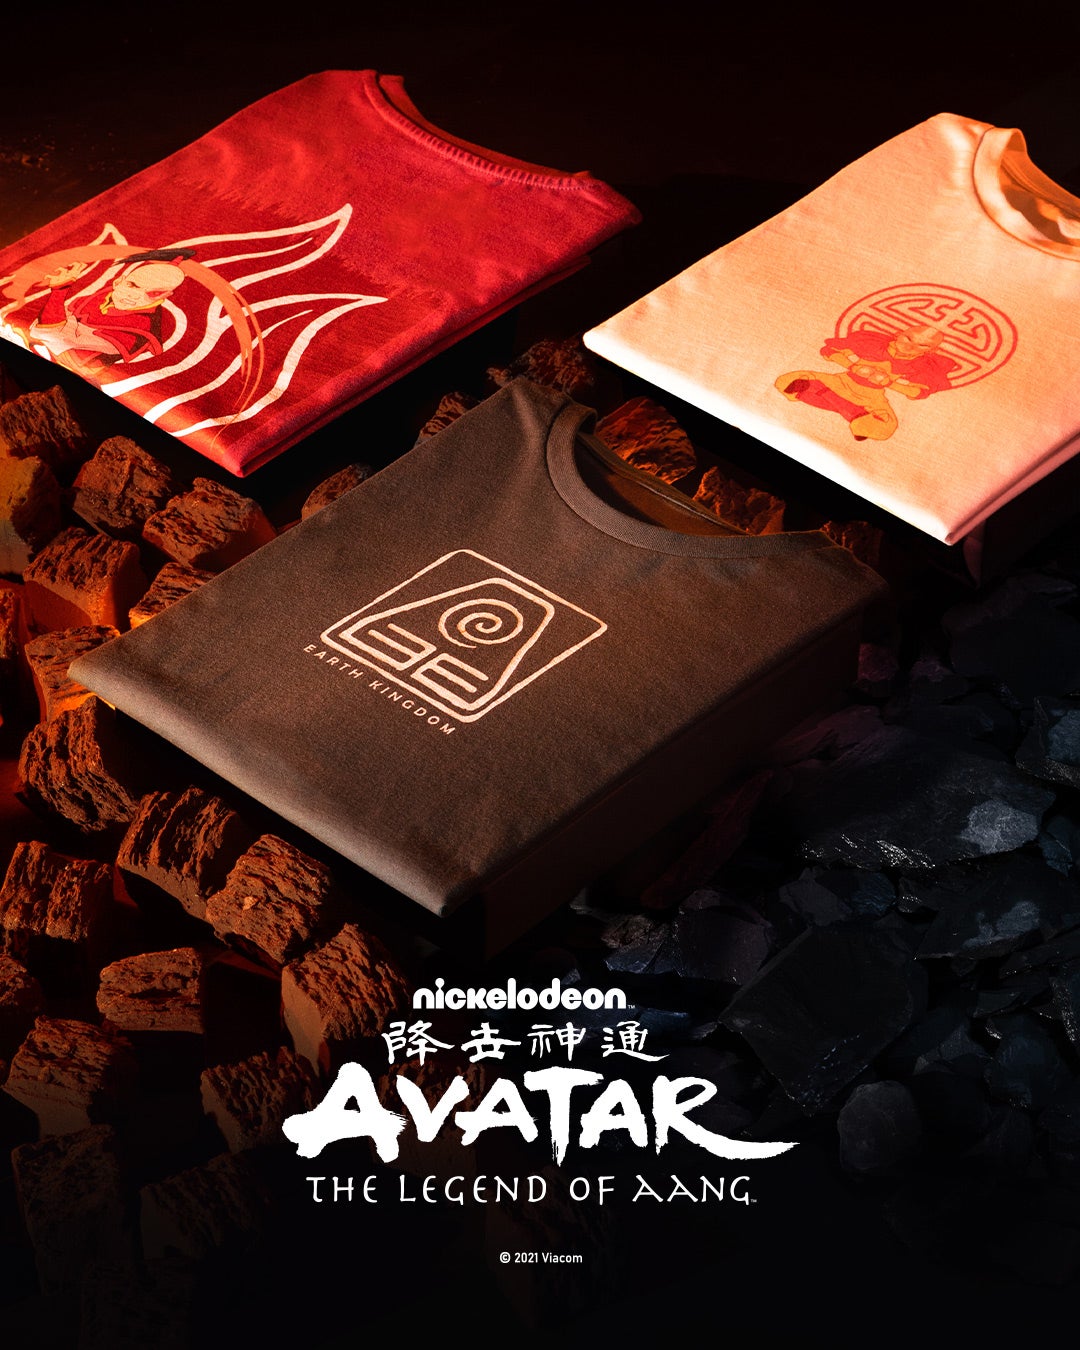 Avatar The Last Airbender Gifts